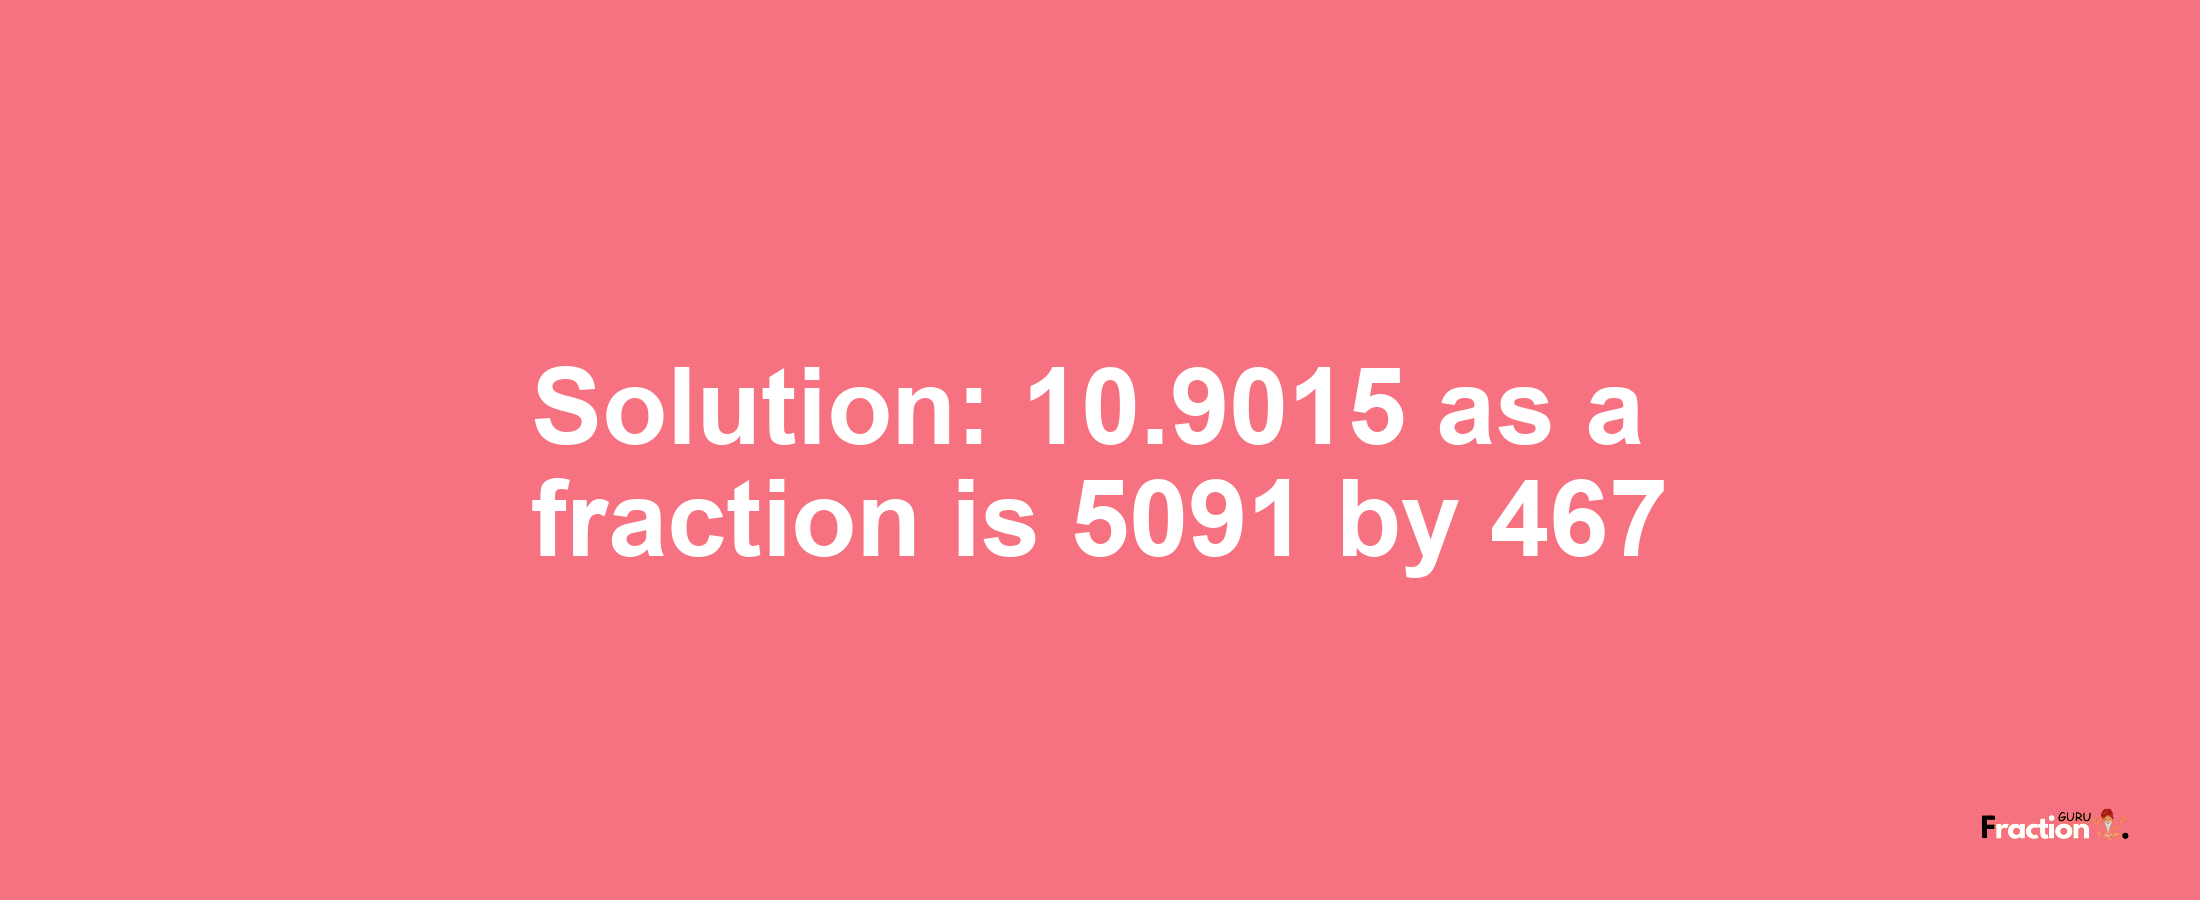 Solution:10.9015 as a fraction is 5091/467